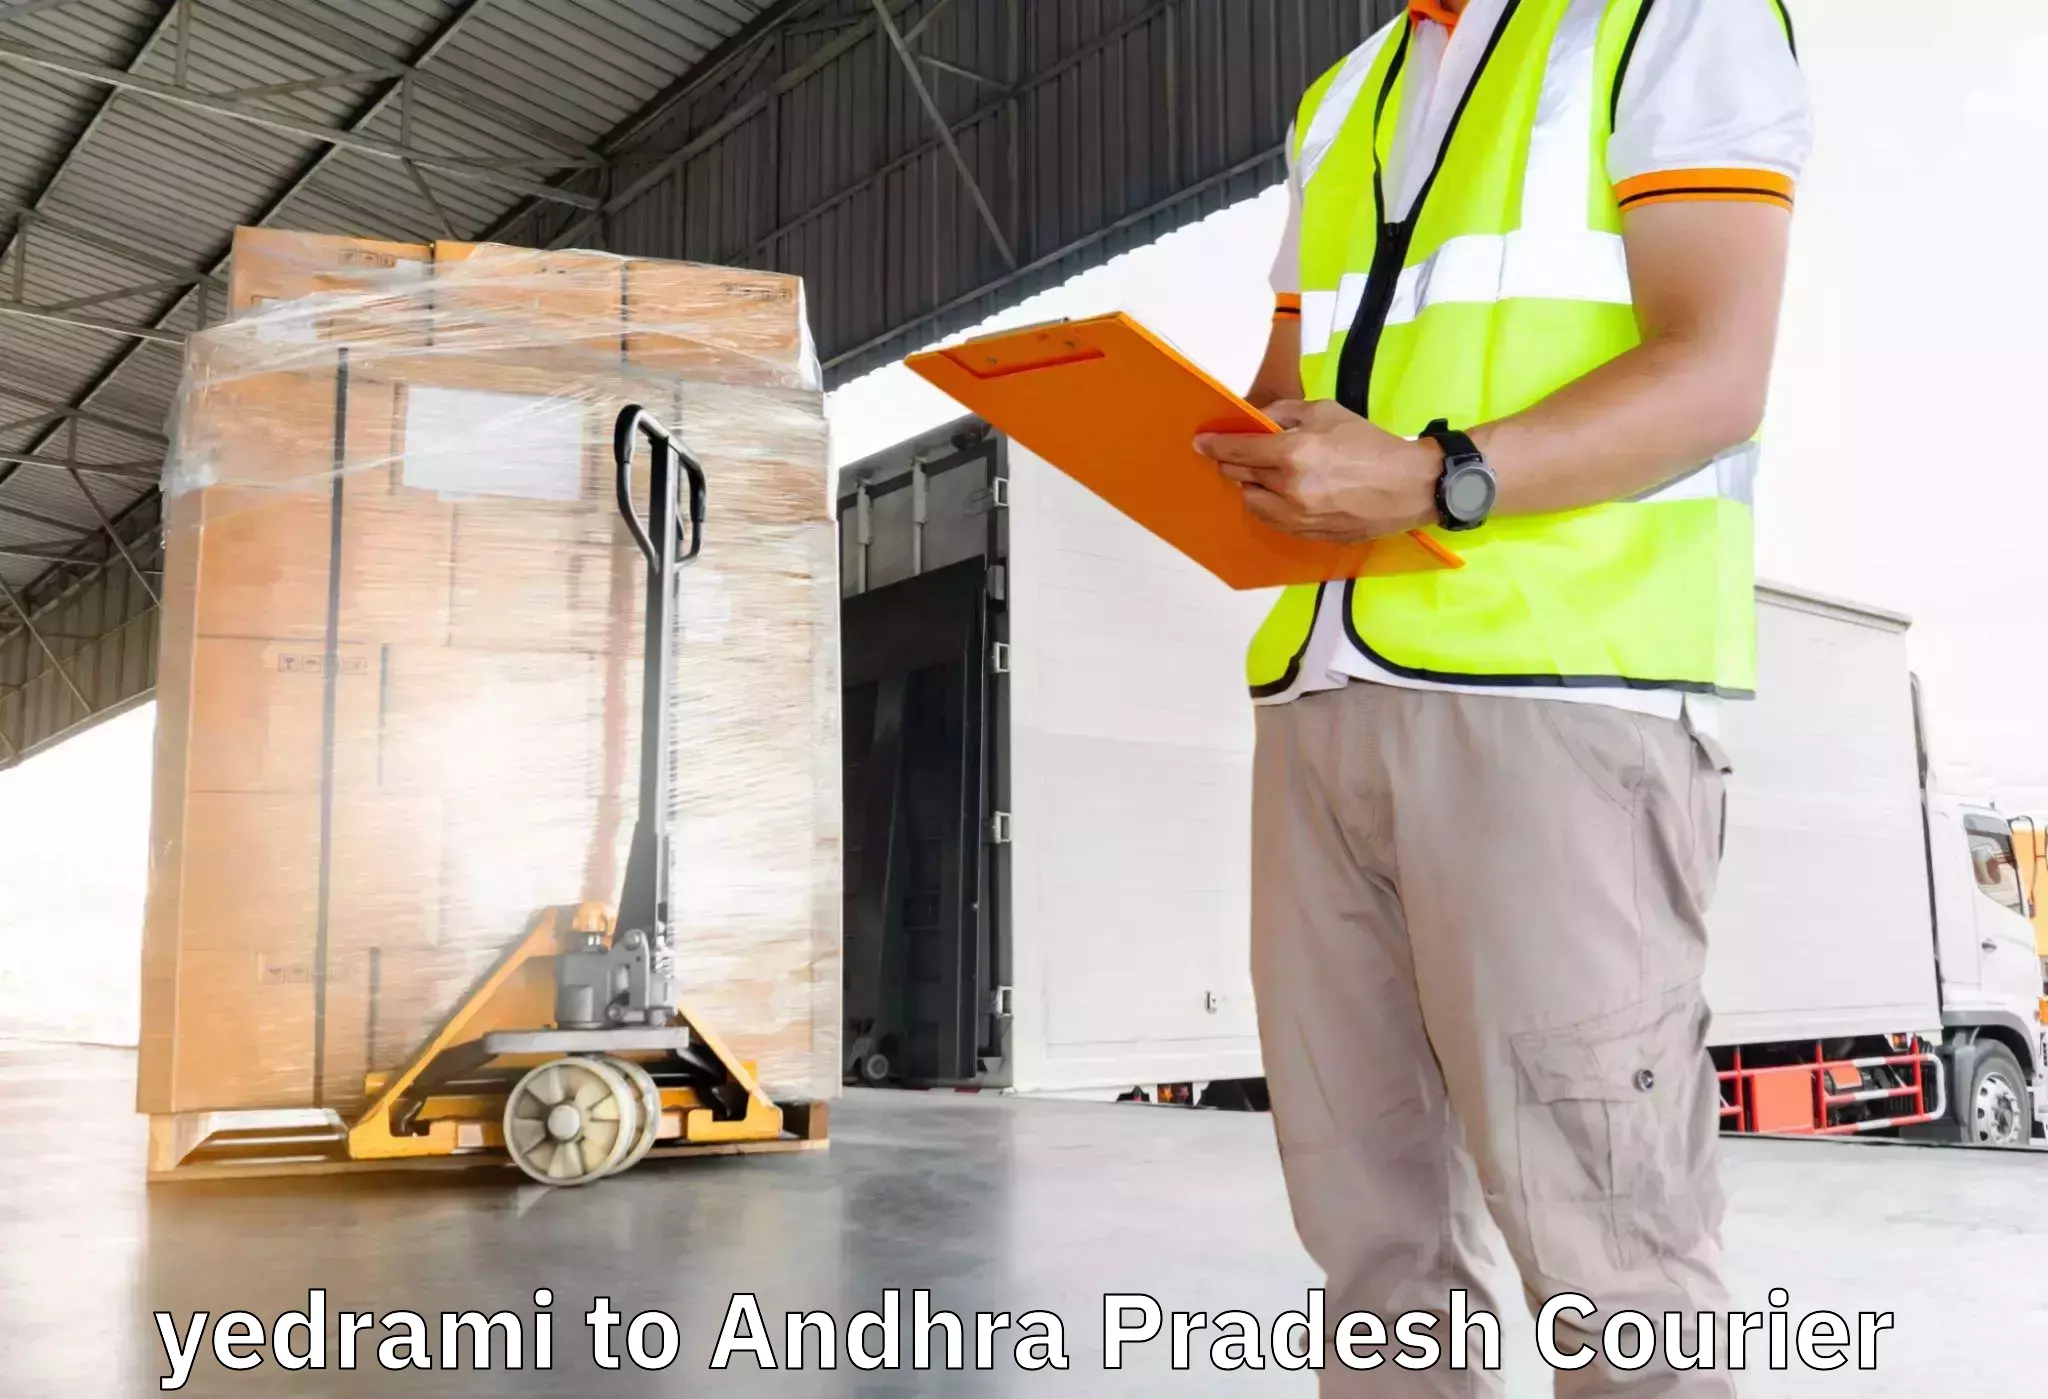 Customized relocation services yedrami to Chintalapudi